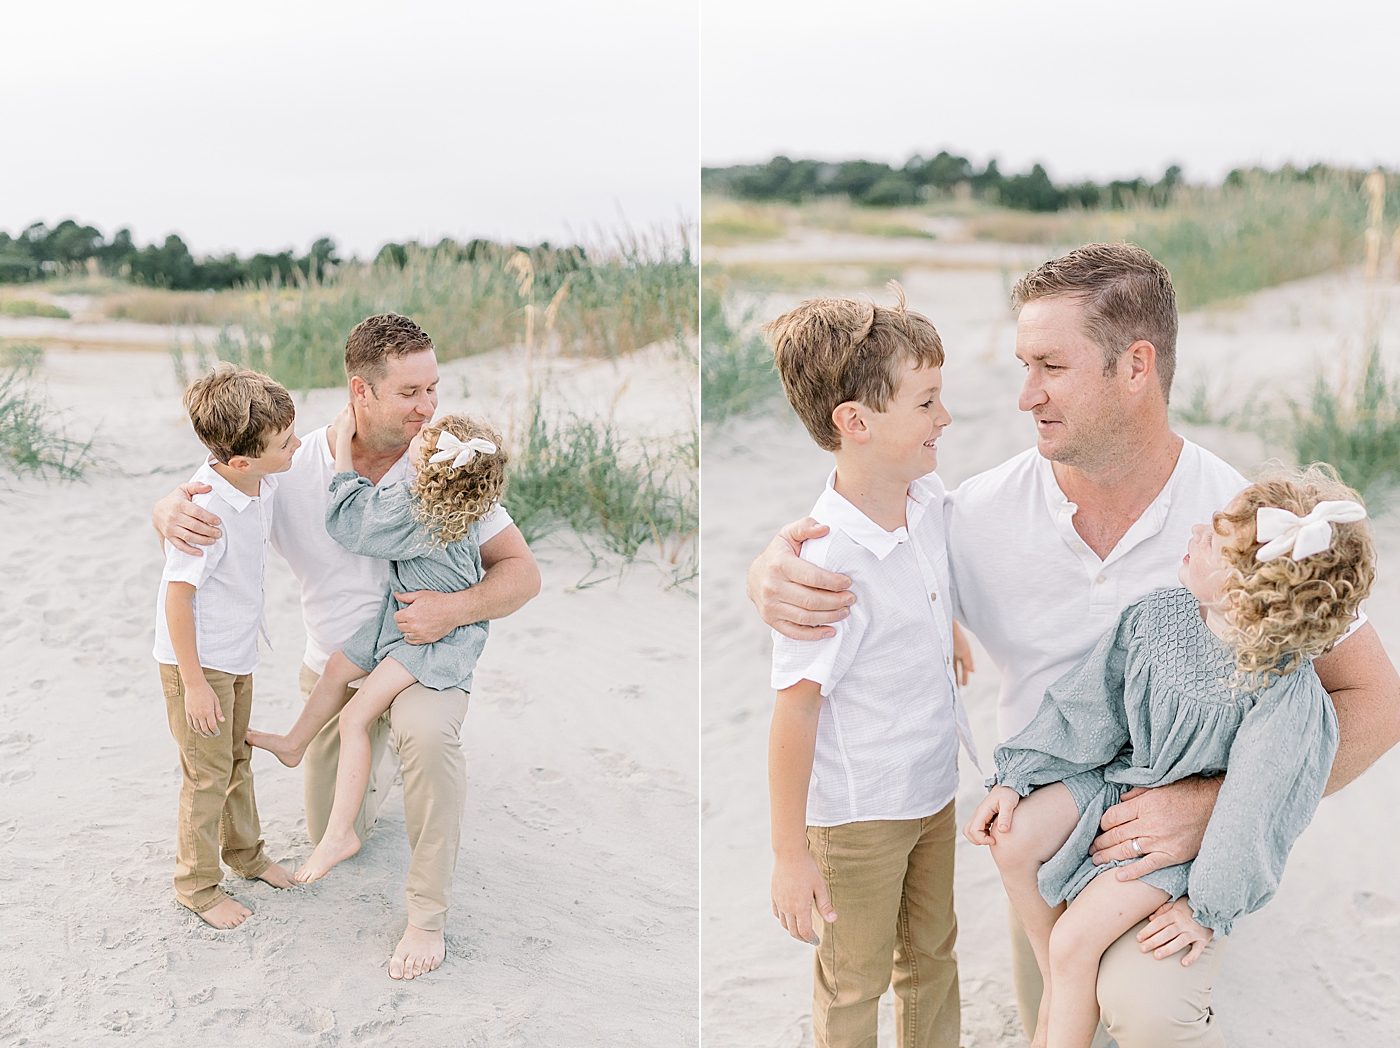 Dad playing with his kids on the beach | Photo by Caitlyn Motycka Photography